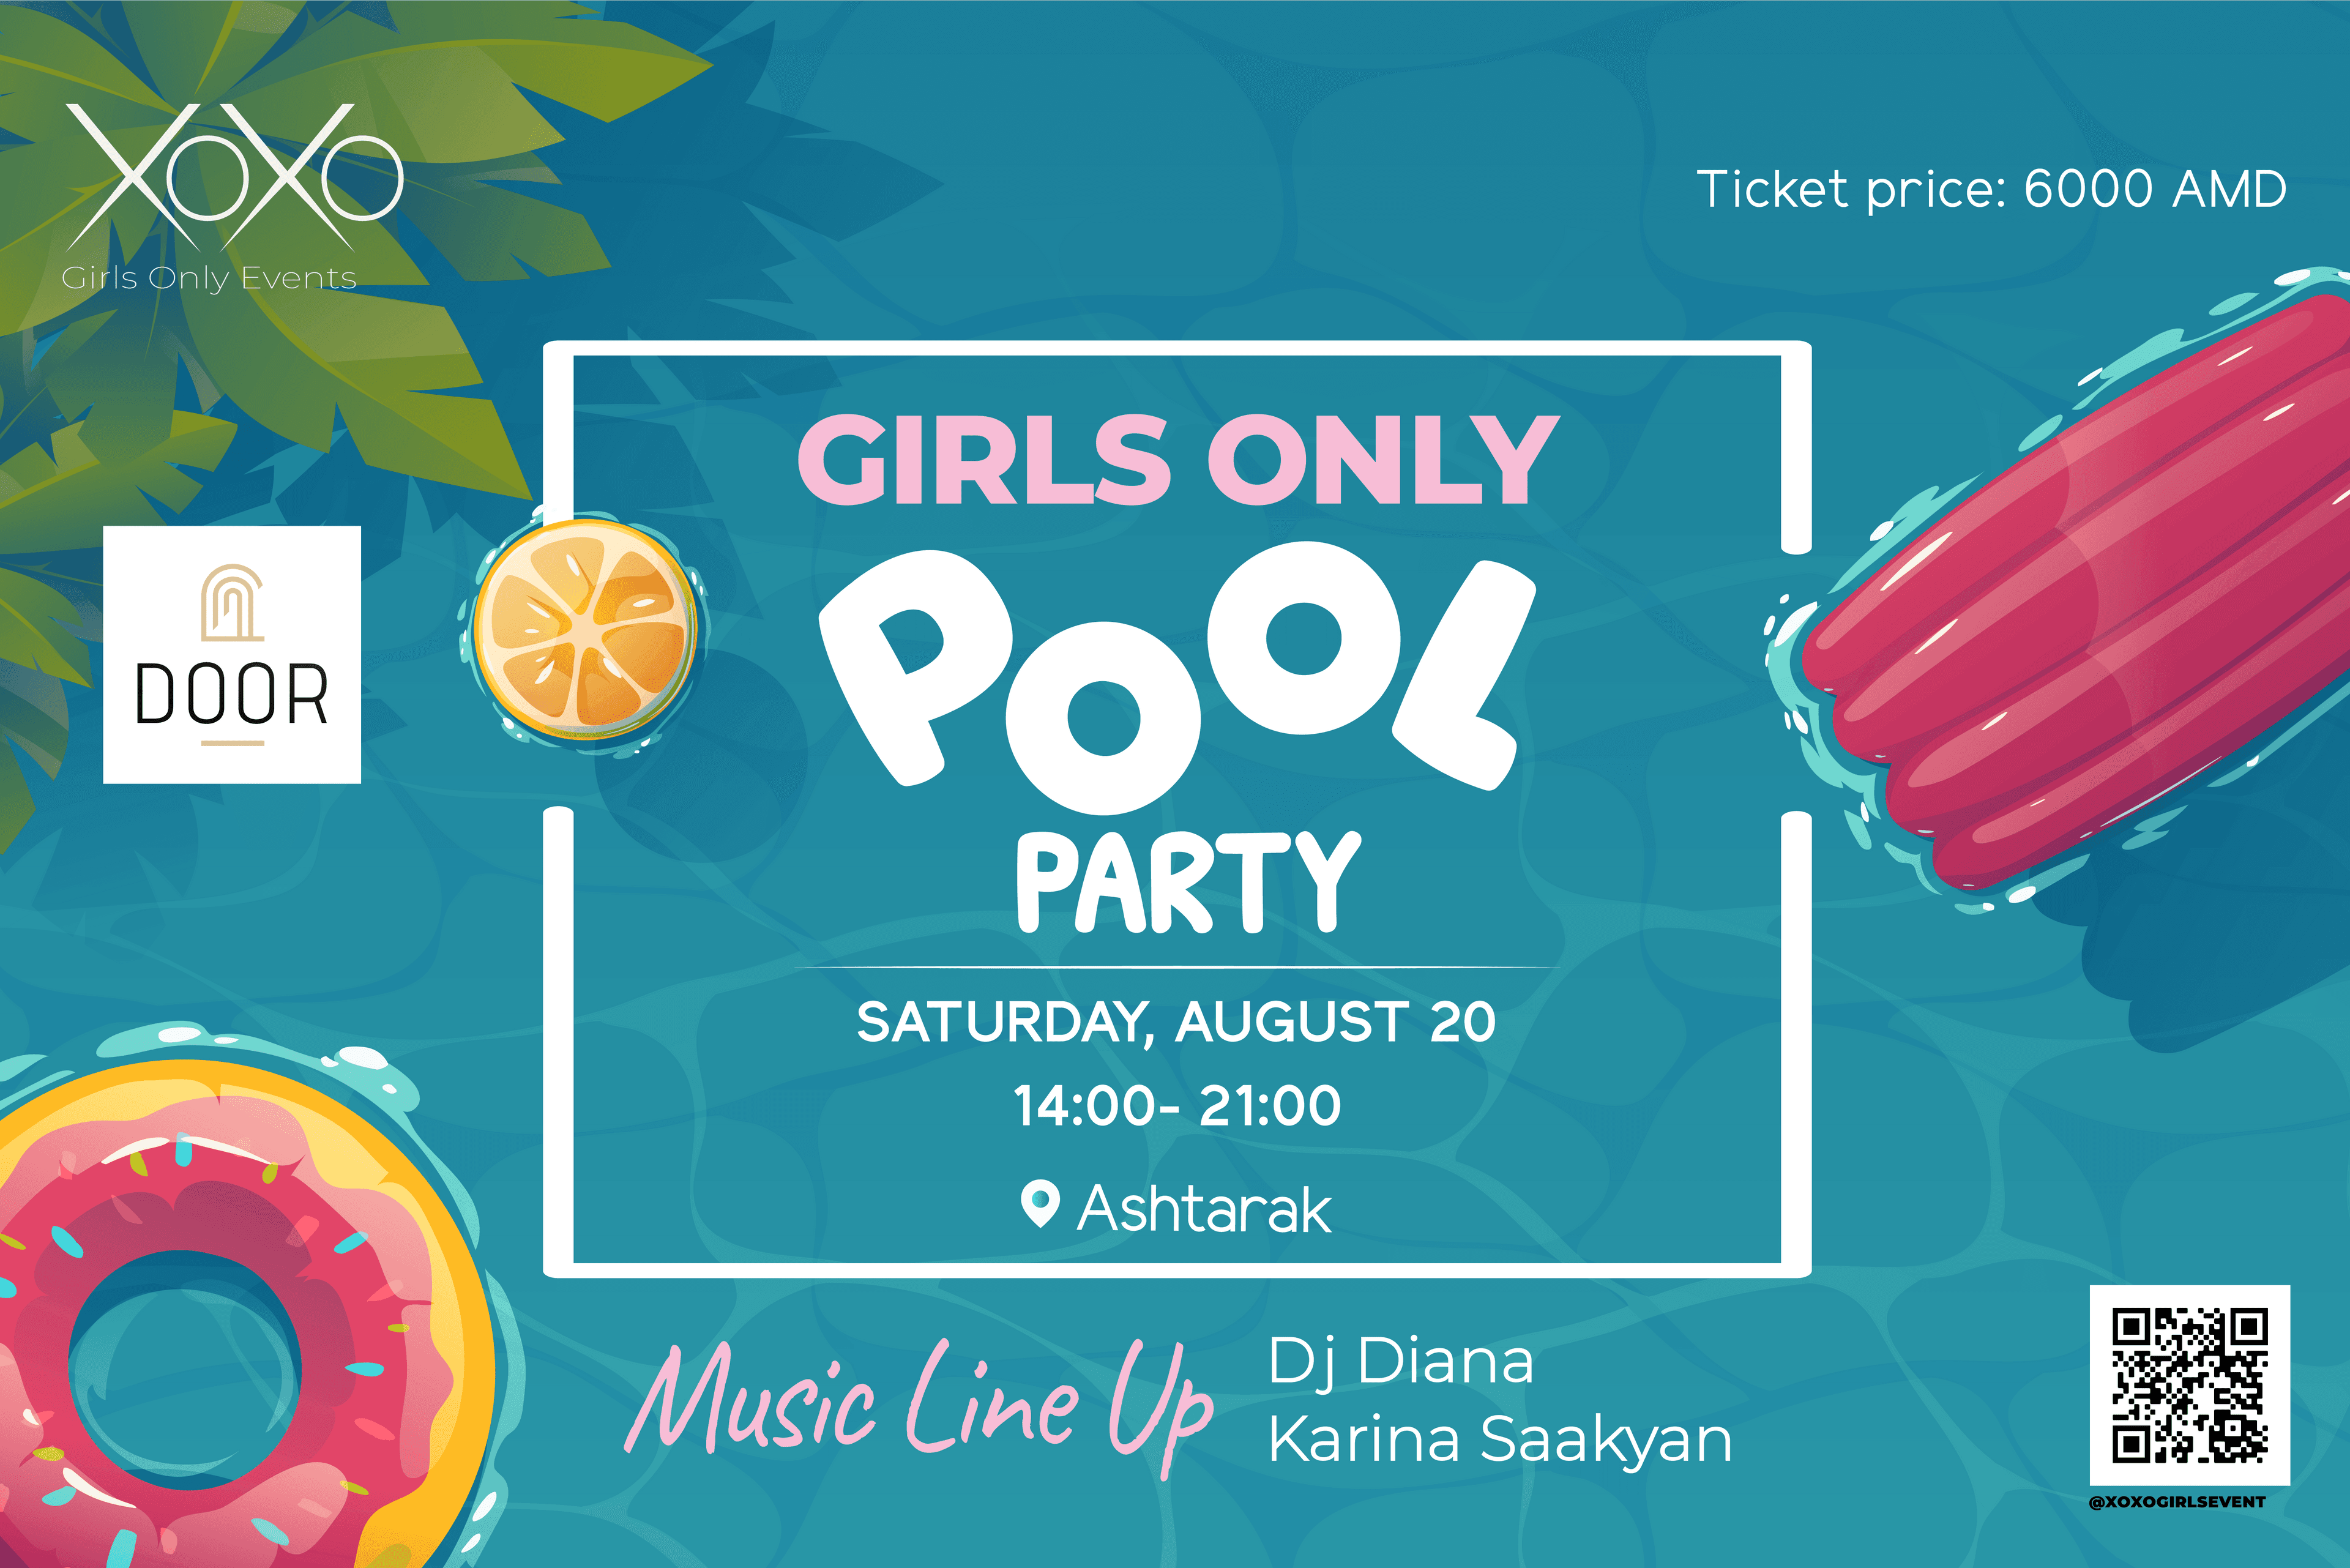 events-only-for-girls-xoxo-armenia